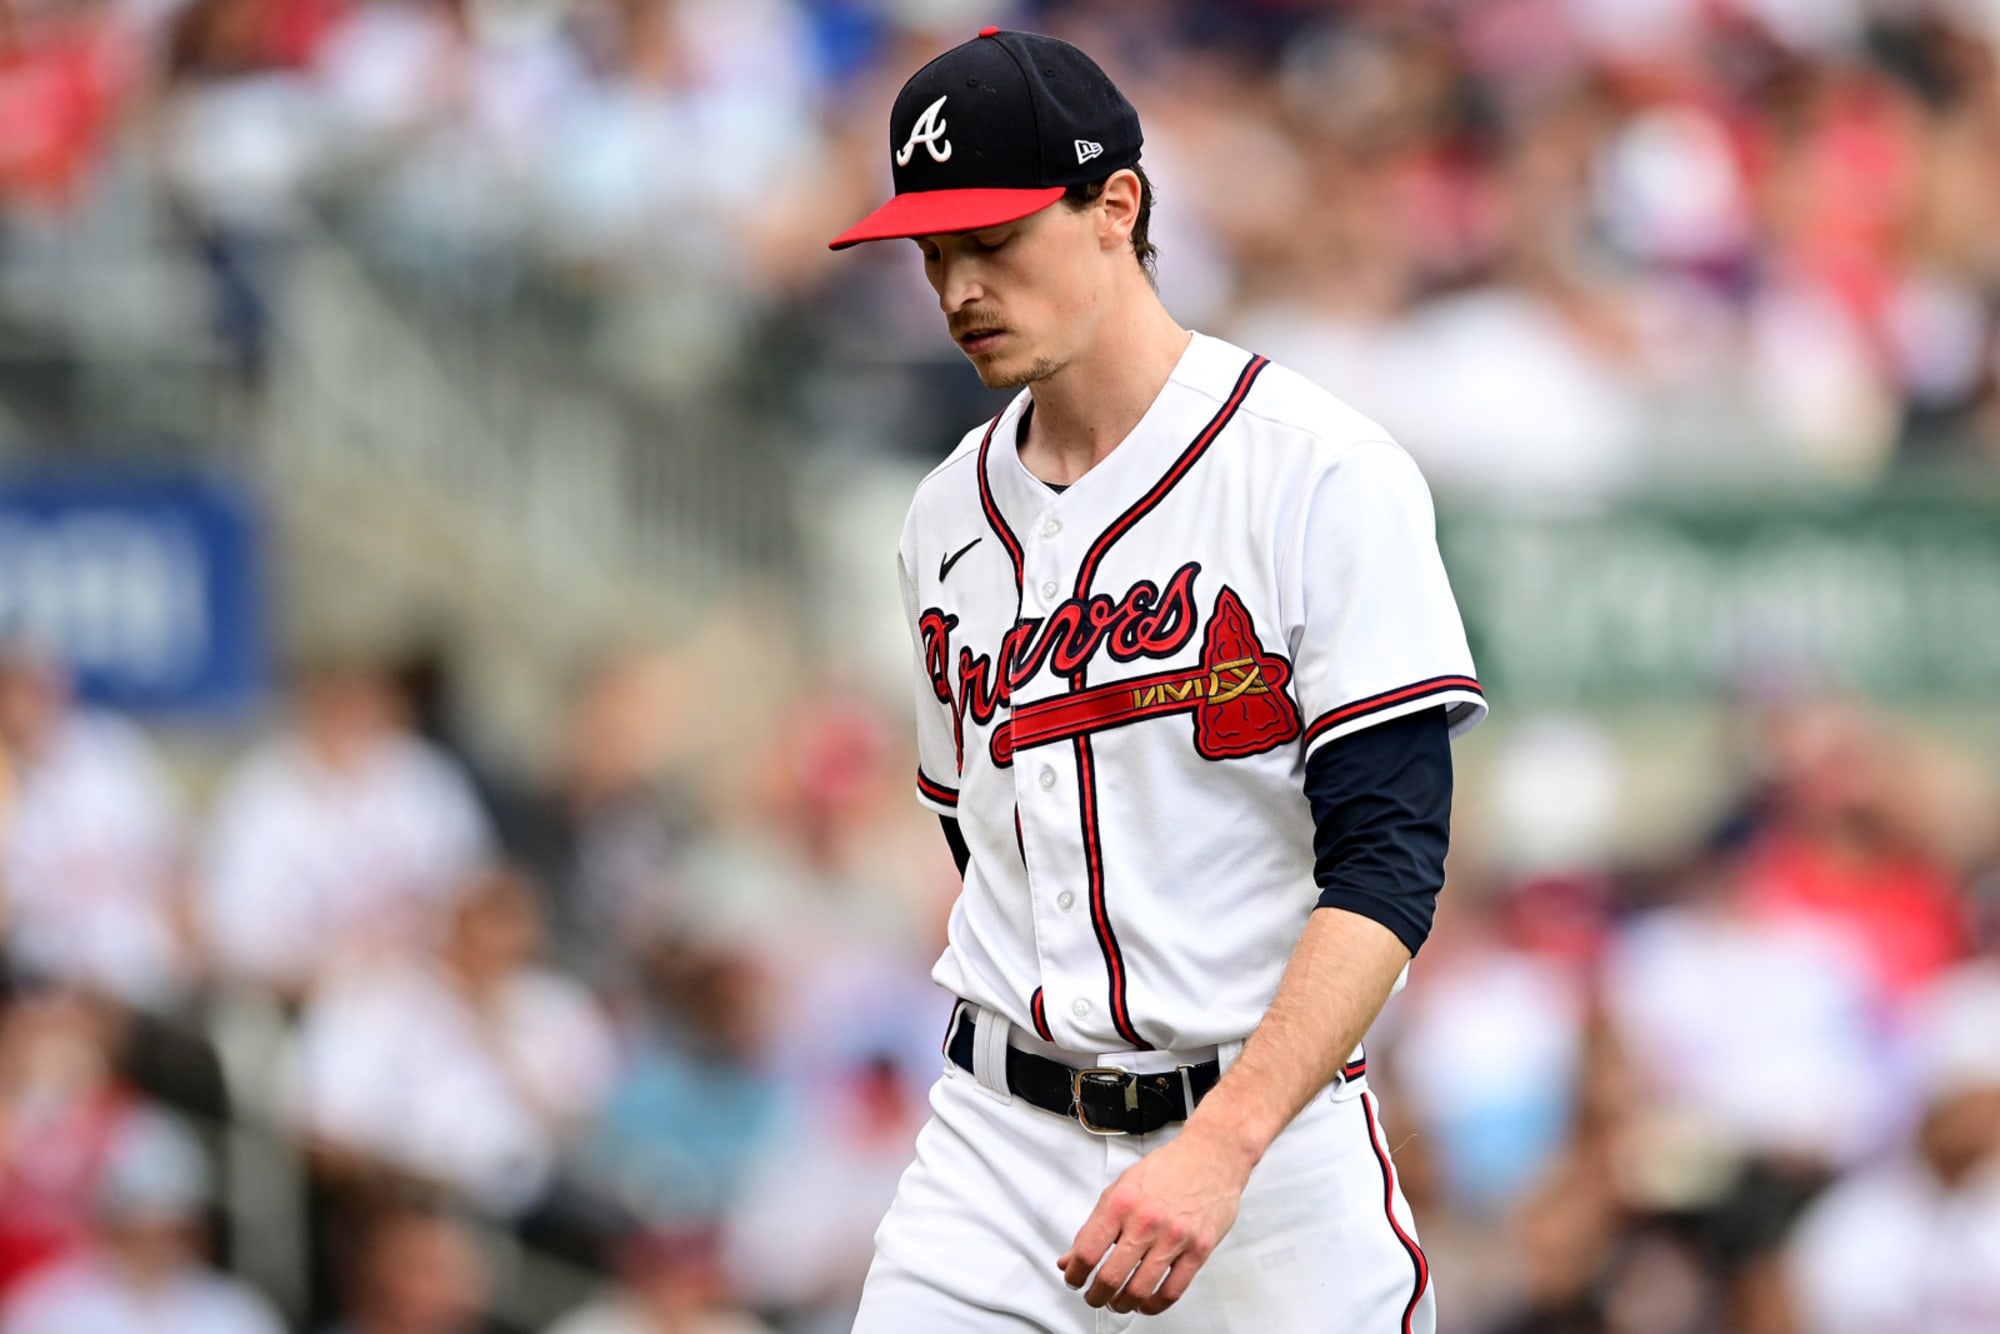 Braves lose Max Fried on opening day, beat Nationals 7-2 - NBC Sports